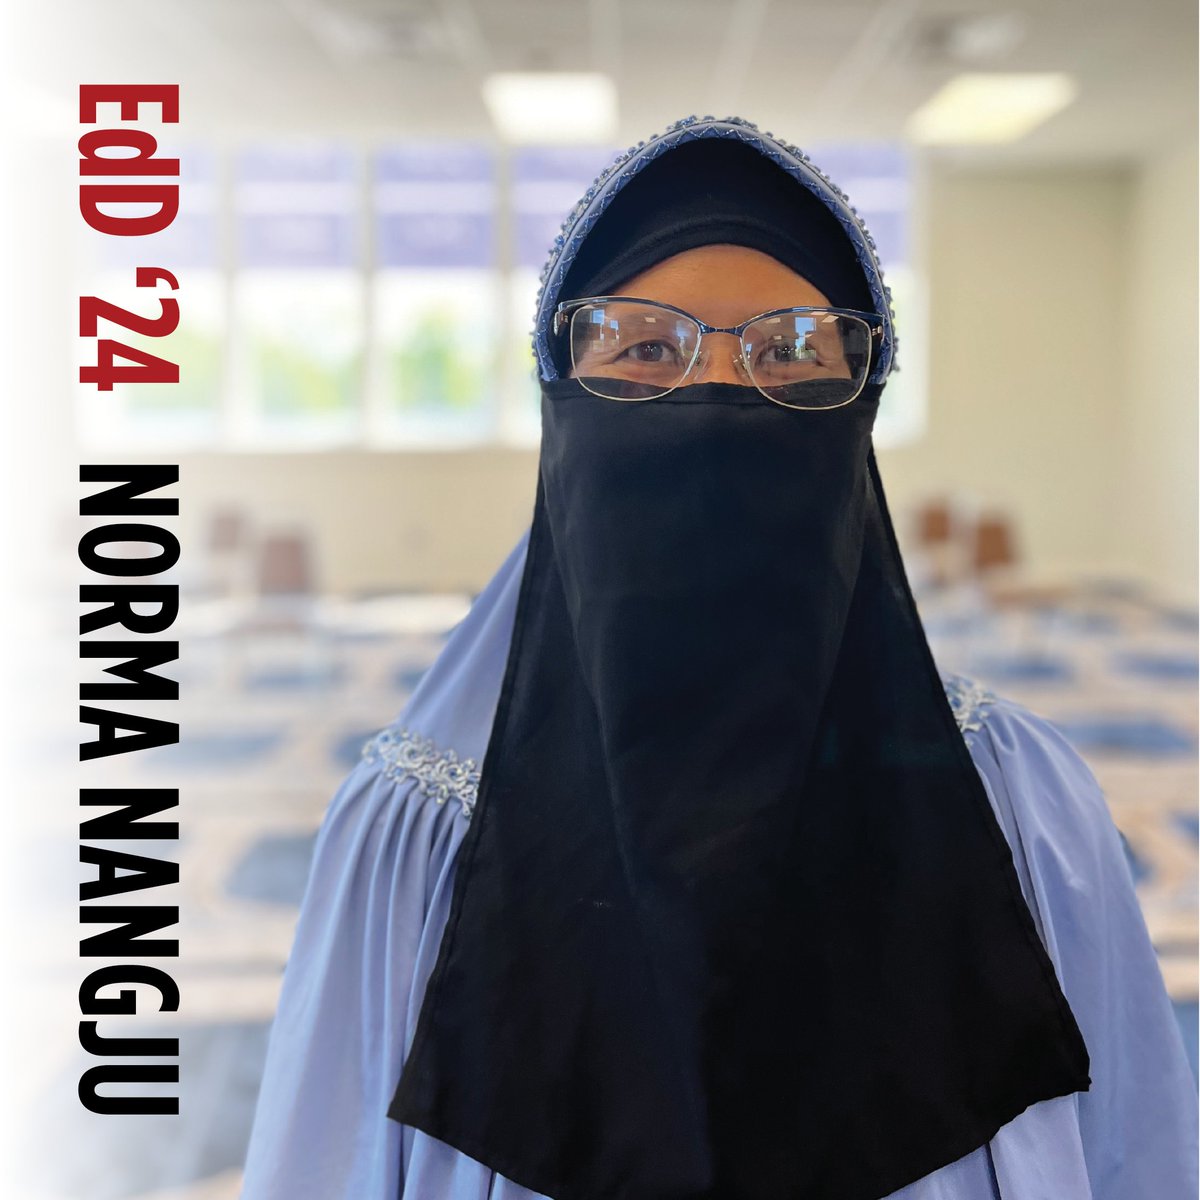 Passion for community engagement leads Islamic school founder to earn UofL doctorate this May. Read more about Norma on CEHD News: bit.ly/3JN08PQ